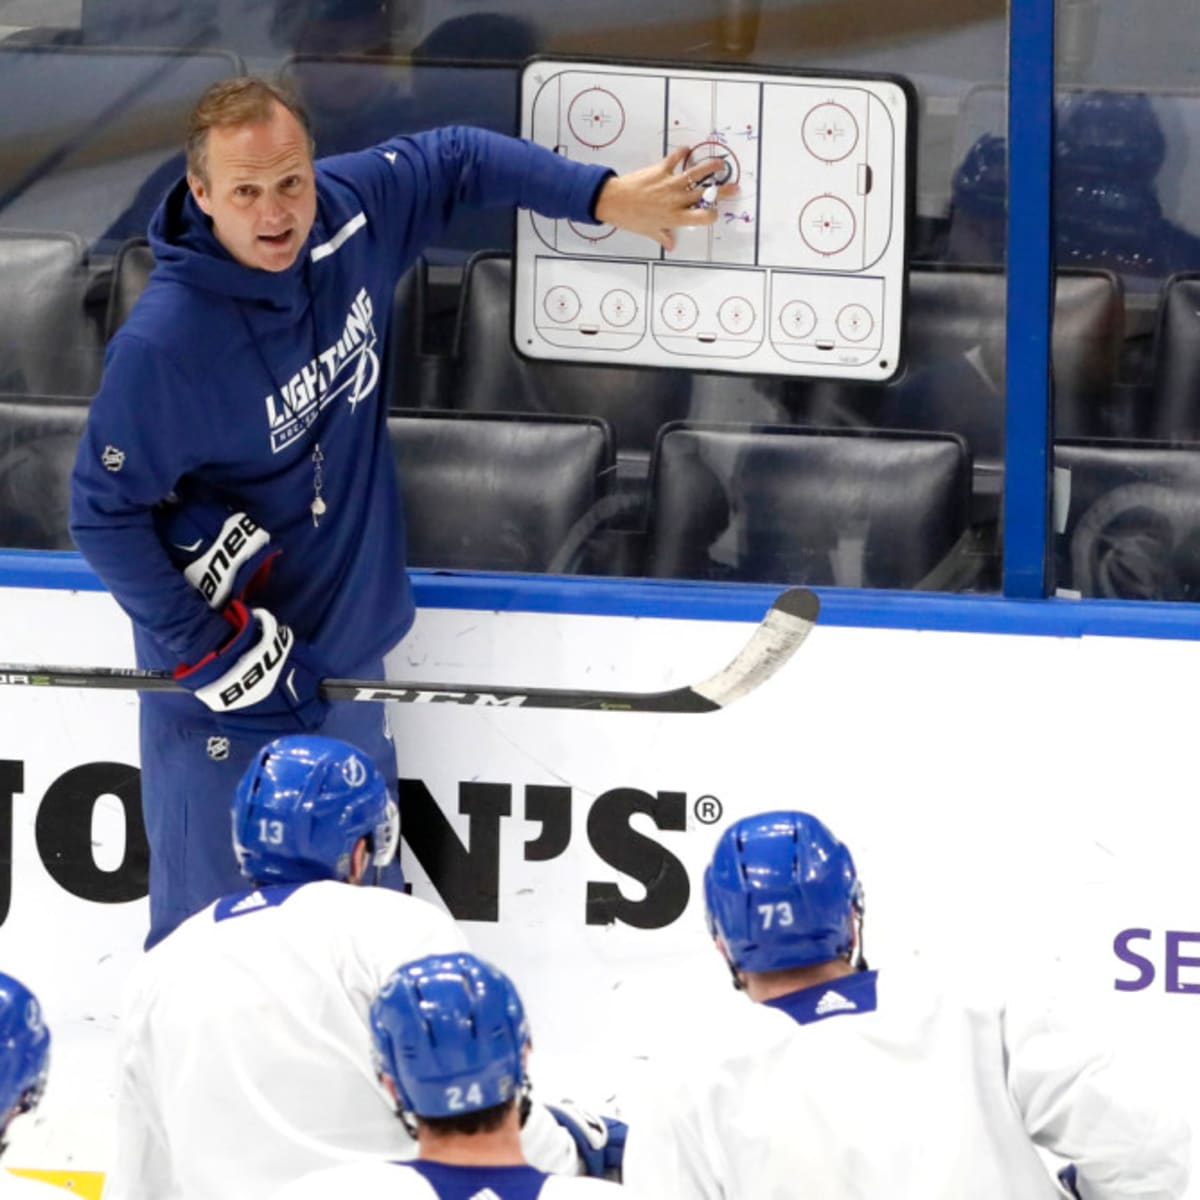 Behind the scenes with Tampa Bay Lightnings Jon Cooper, coaching staff